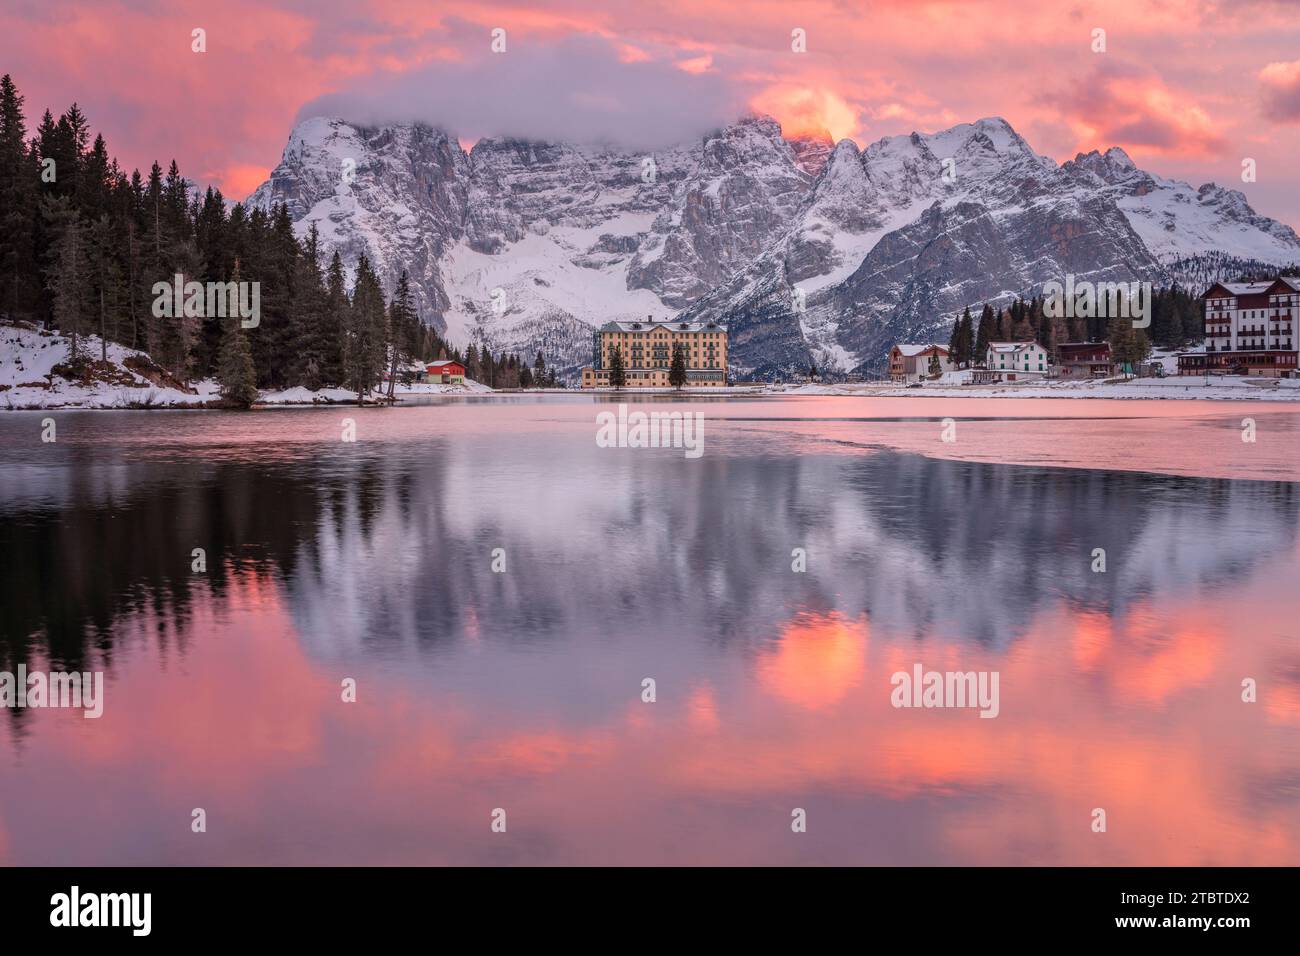 Italy, Veneto, province of Belluno, Auronzo di Cadore, iconic view of Misurina with the lake and mount Sorapis in background, breathtaking sunset, Dolomites Stock Photo